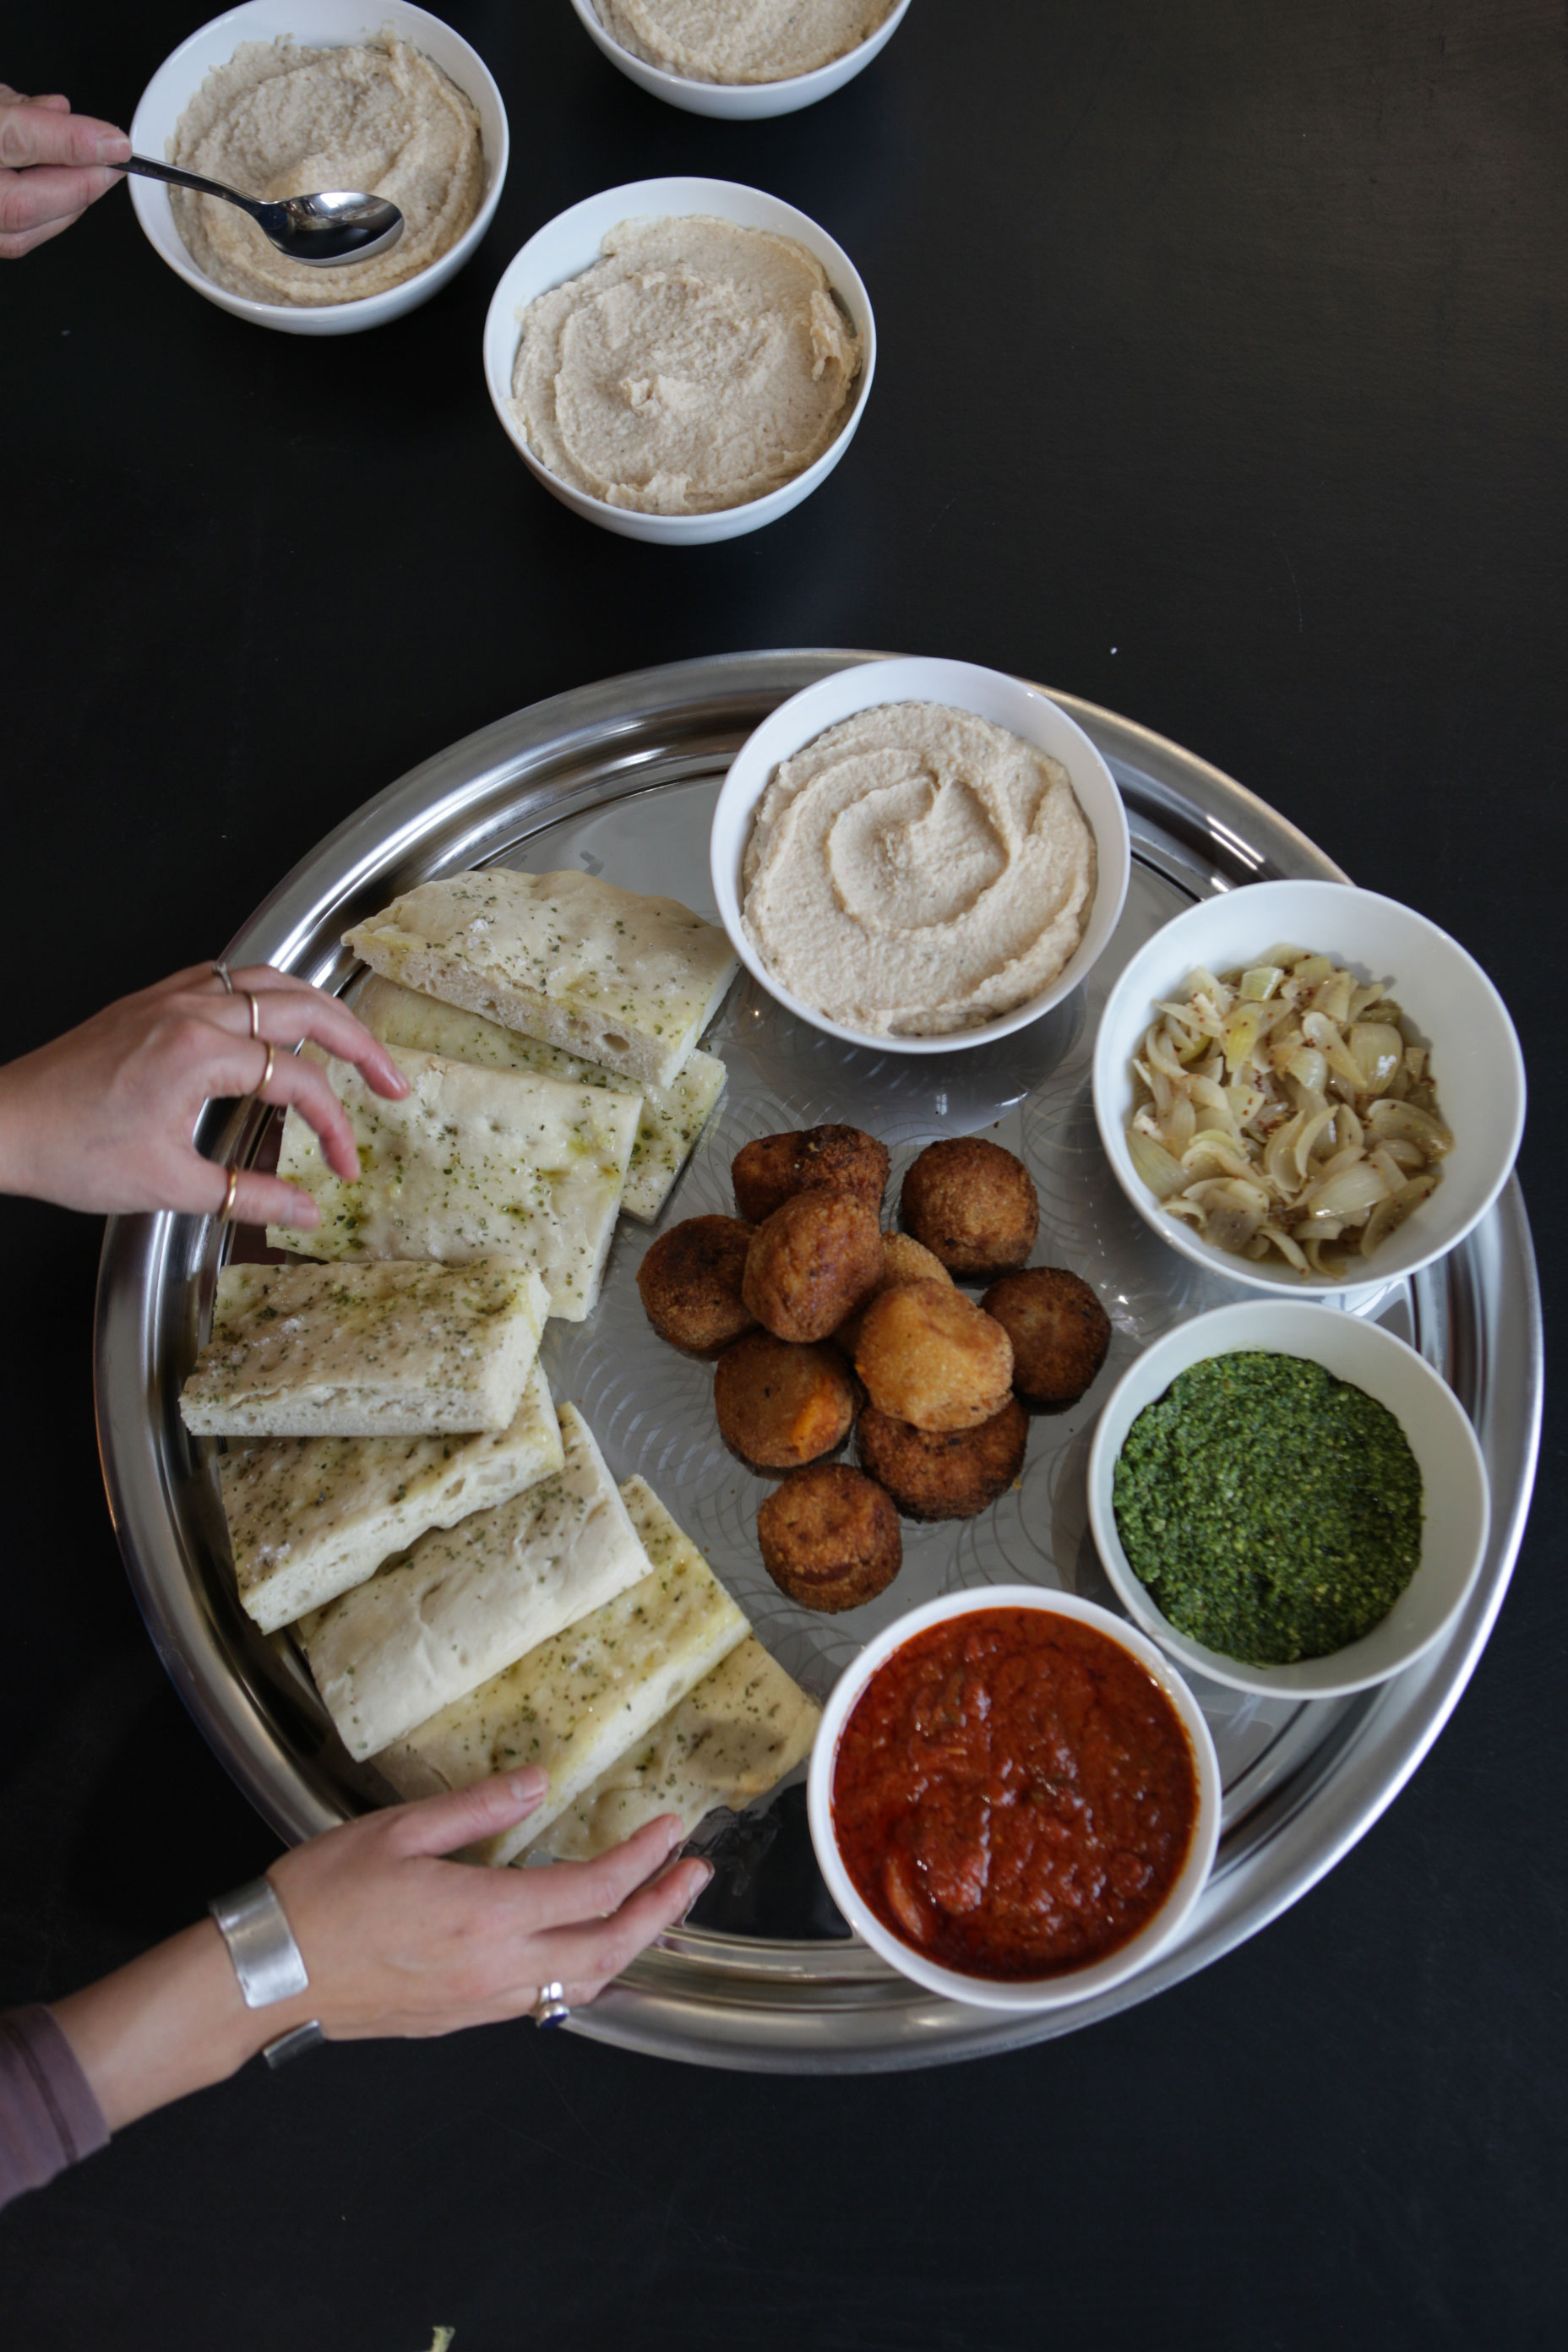 Focaccia and dips. From Studio Olafur Eliasson: The Kitchen.